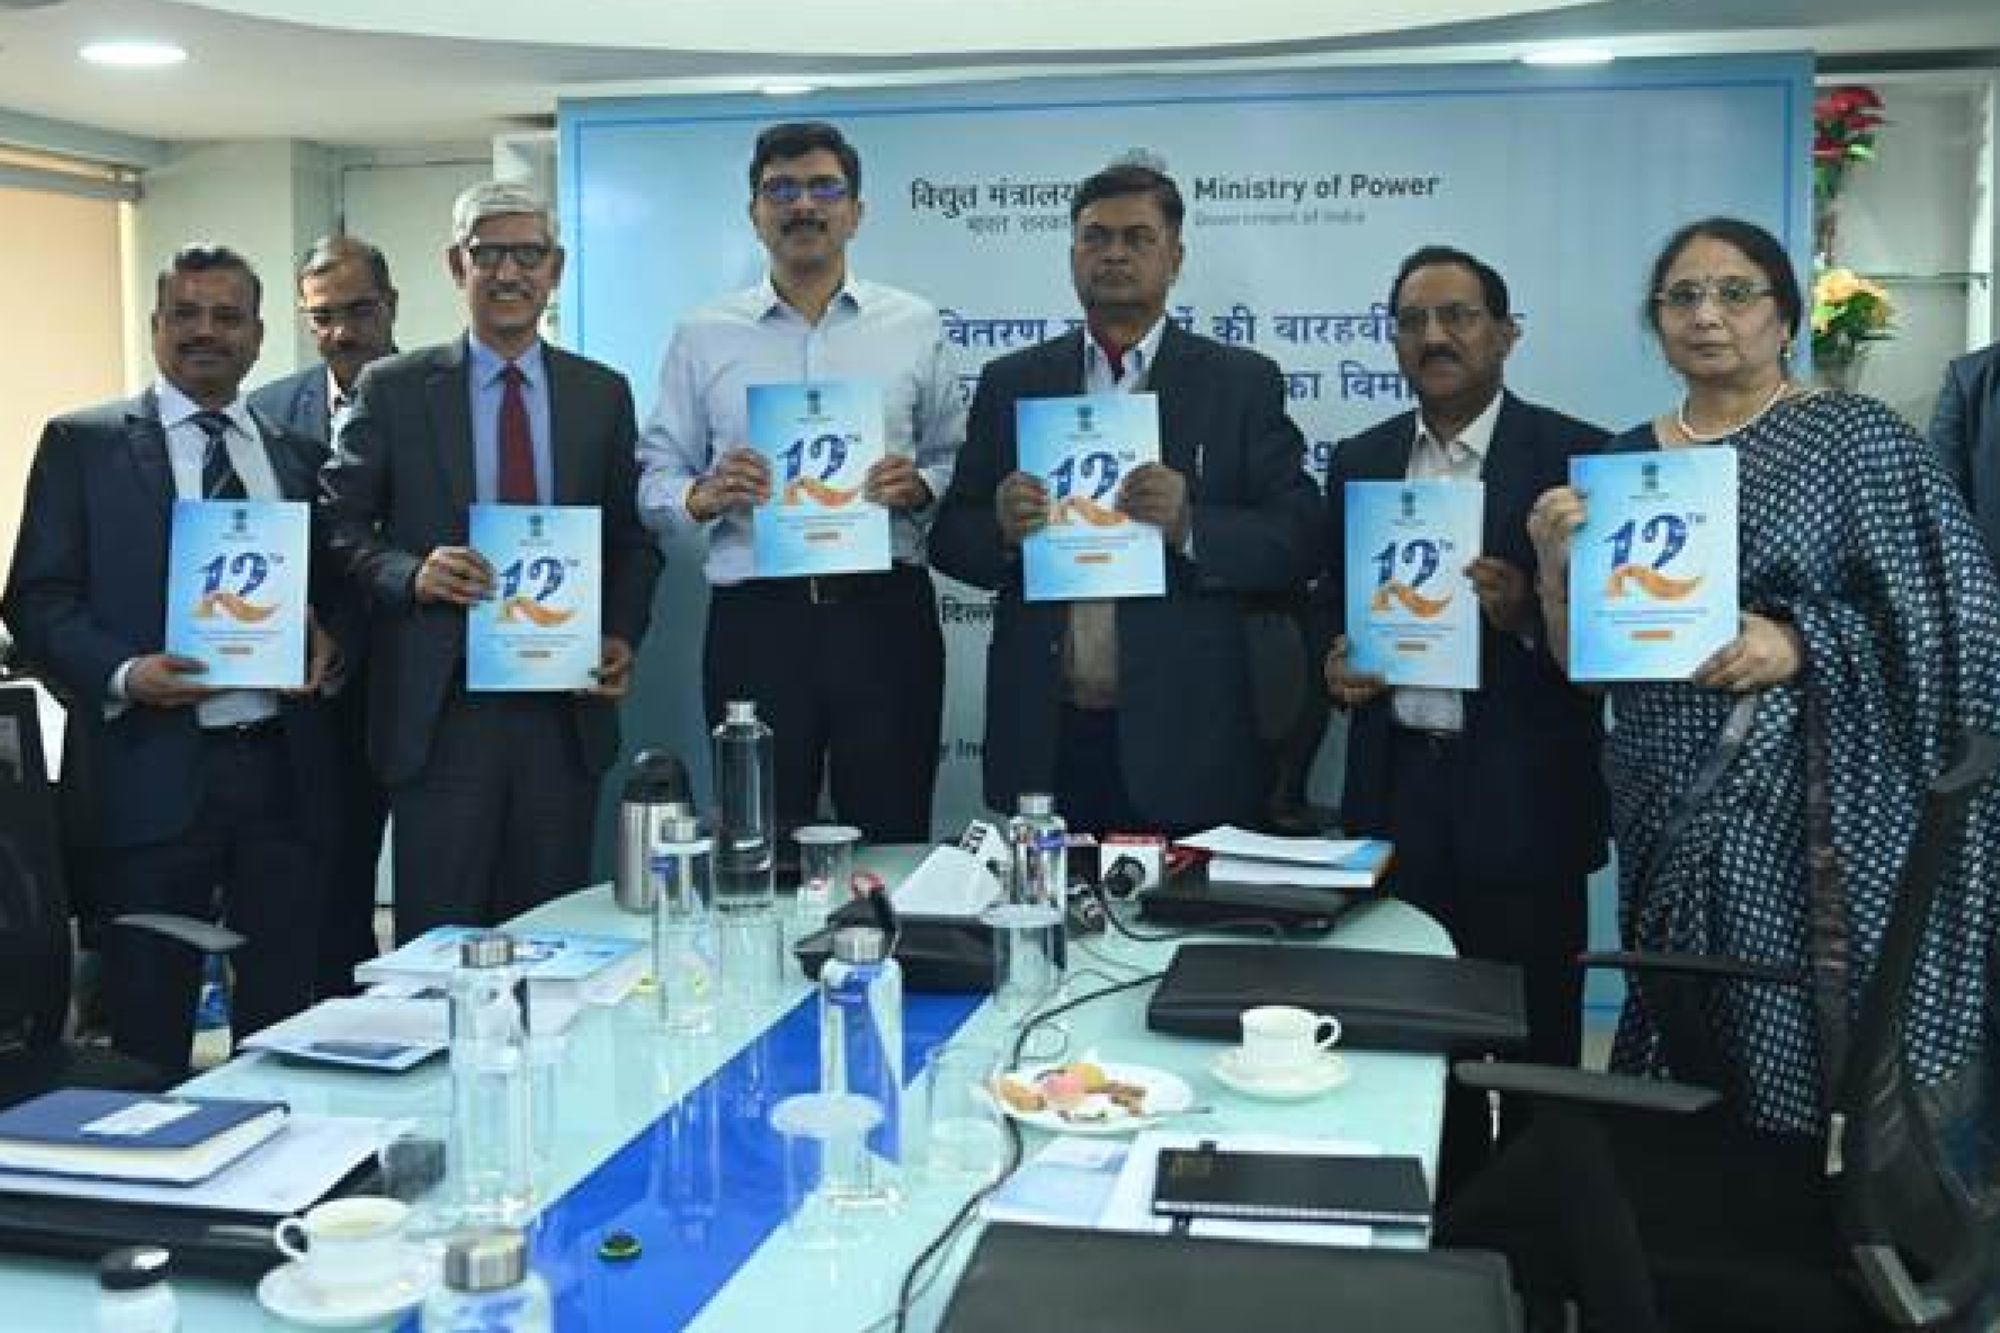 12th integrated rating of DISCOMs unveiled encouraging performance trends and sectoral growth